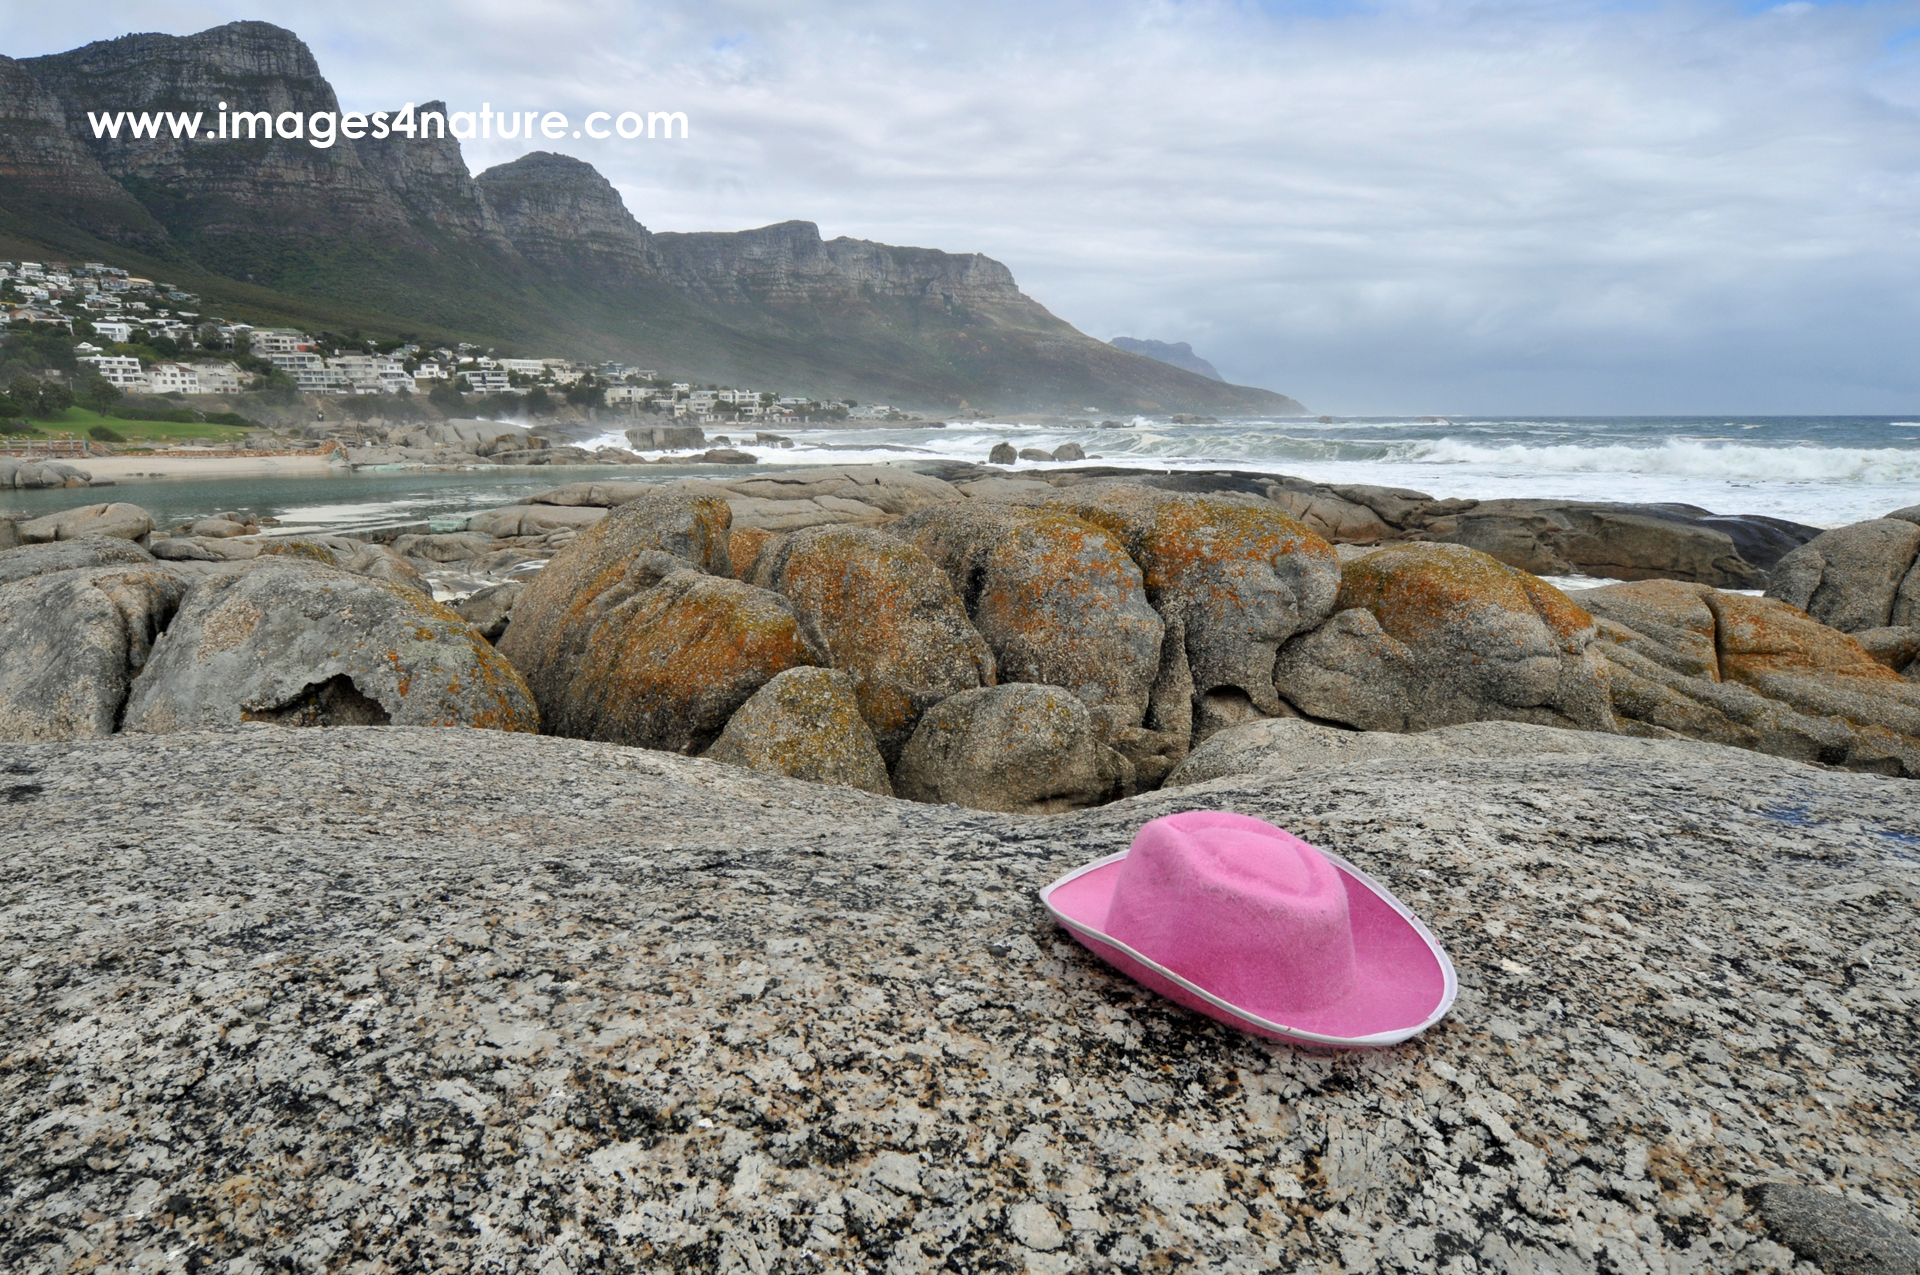 Pink hat on large boulder against sea and mountain range